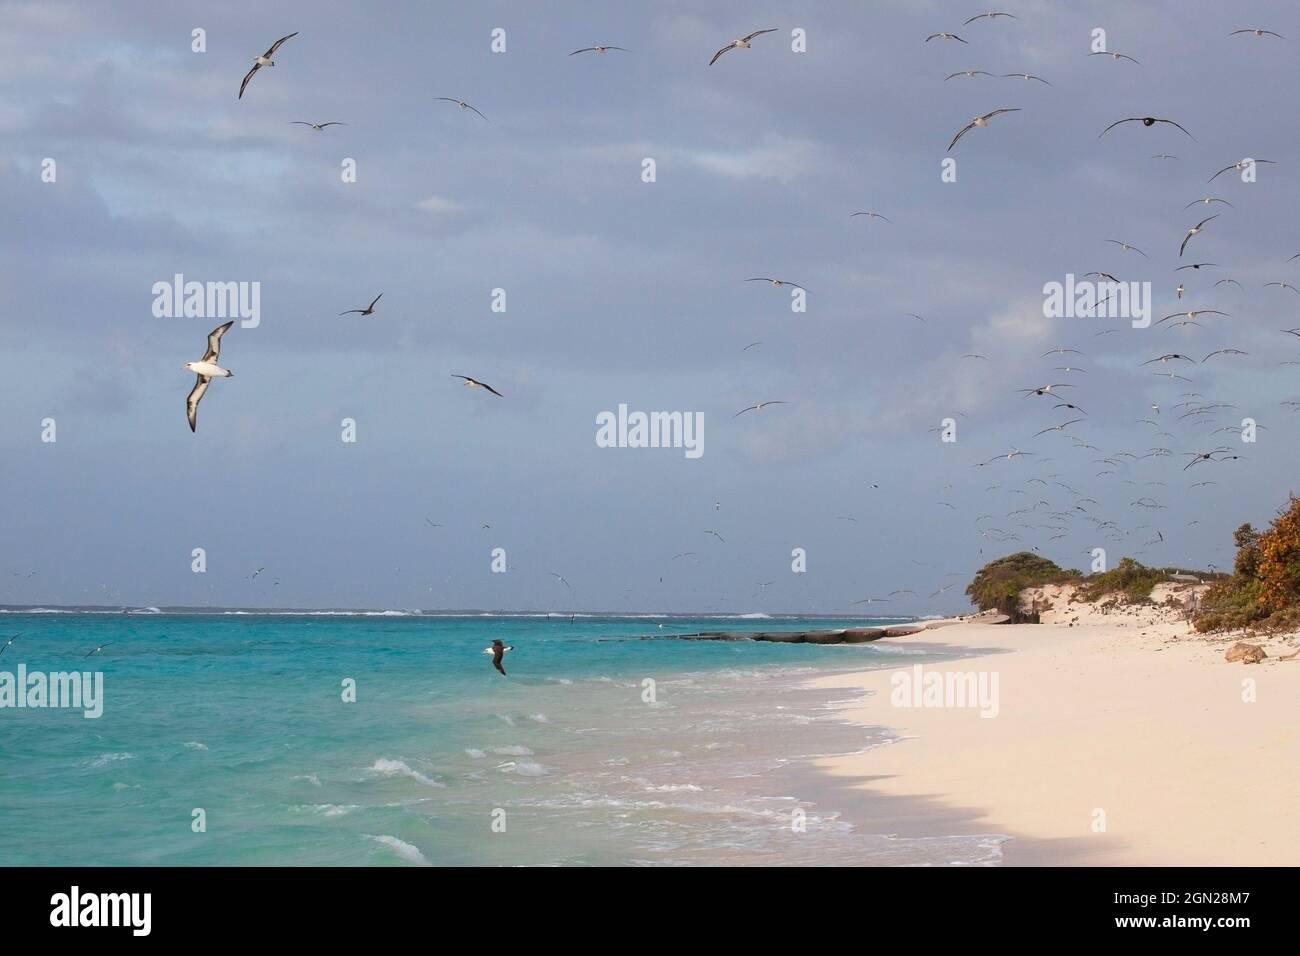 Albatrosses flying over the beach on Midway Atoll on their way out to the Pacific Ocean in the early morning Stock Photo